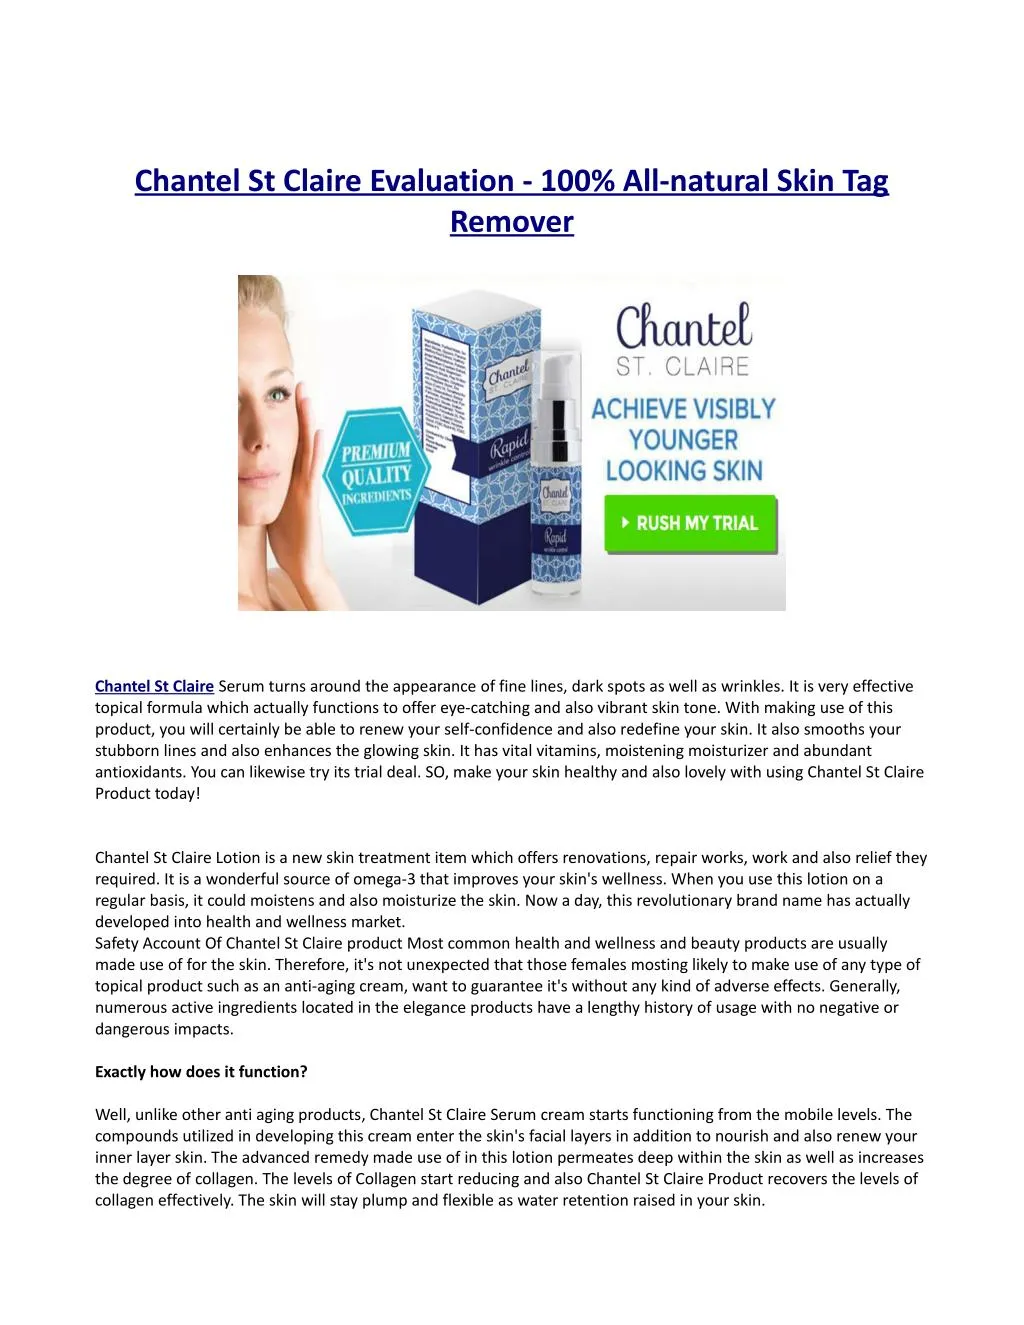 chantel st claire evaluation 100 all natural skin